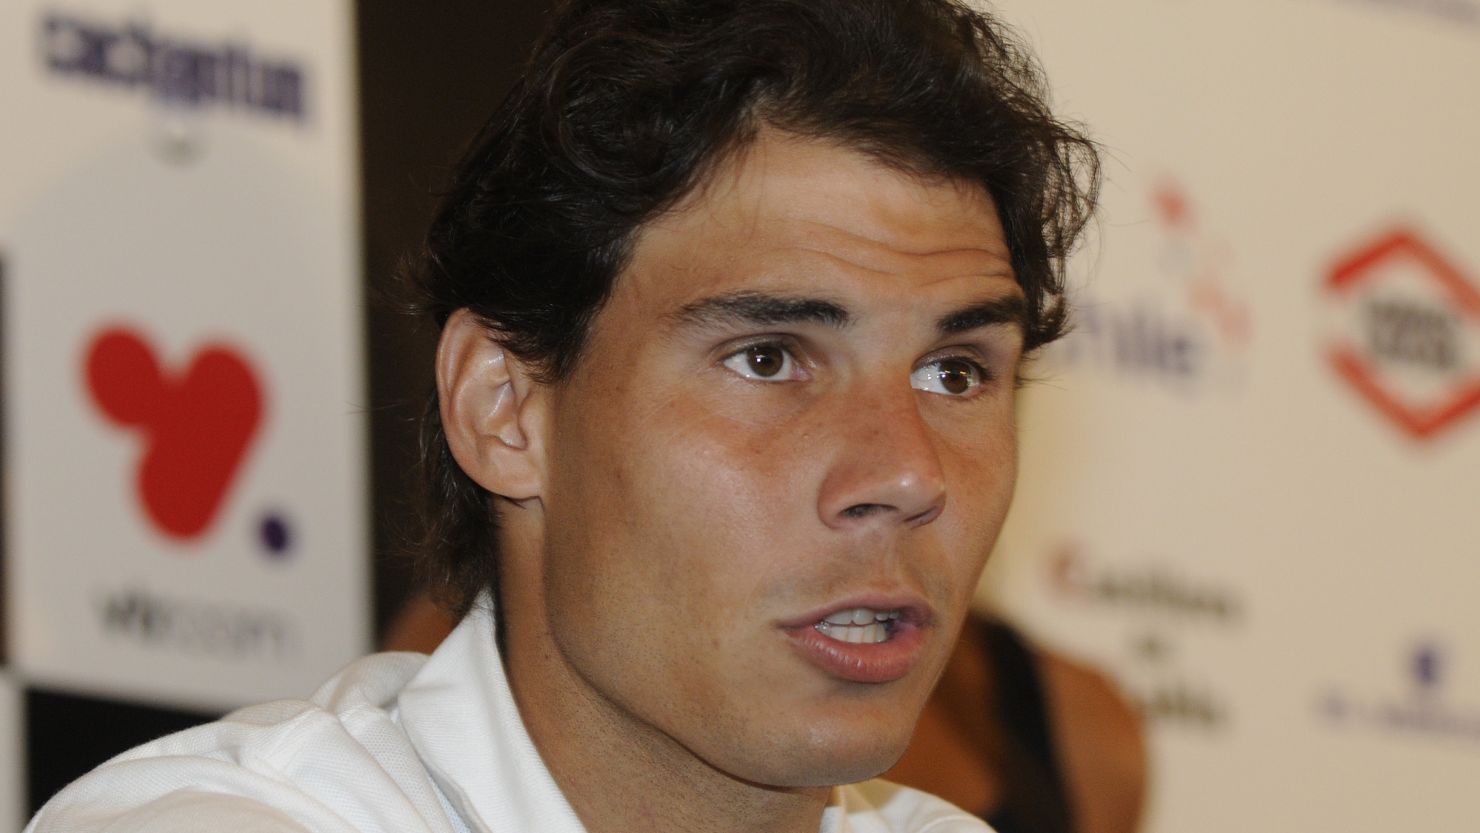 Spanish tennis star Rafael Nadal speaks during a press conference in Vina del Mar, where he will play for the first time.